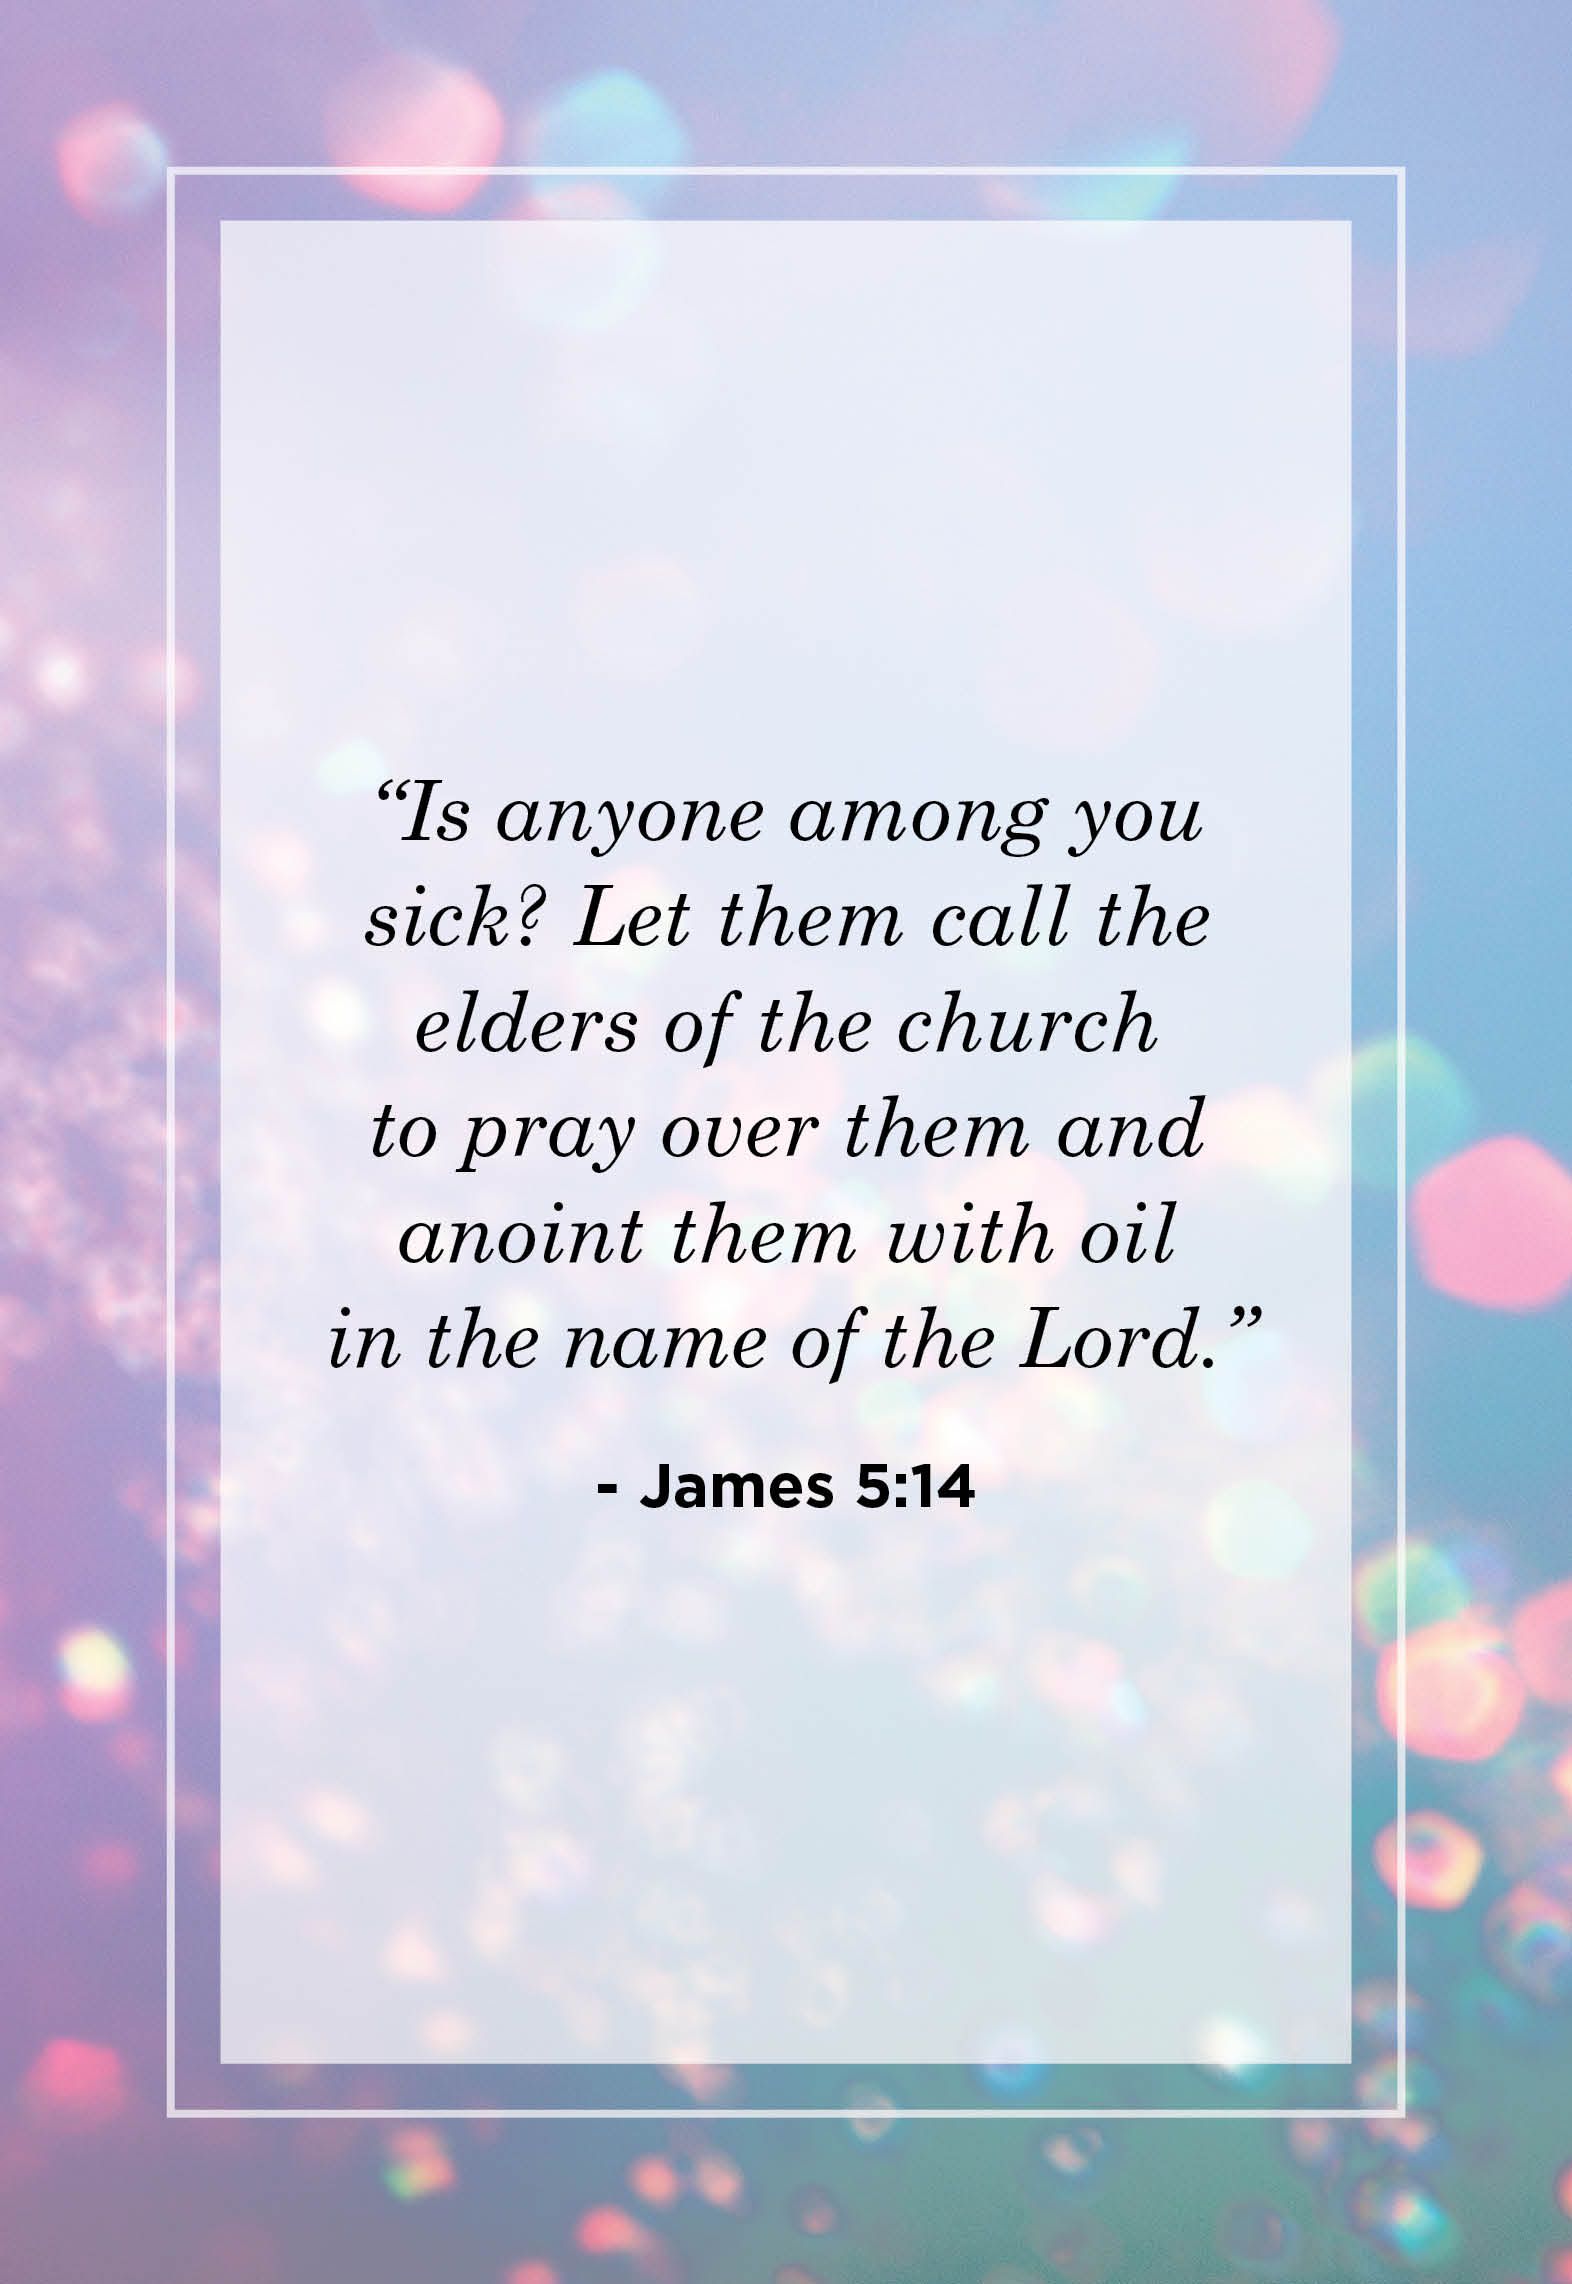 prayer quotes for the sick